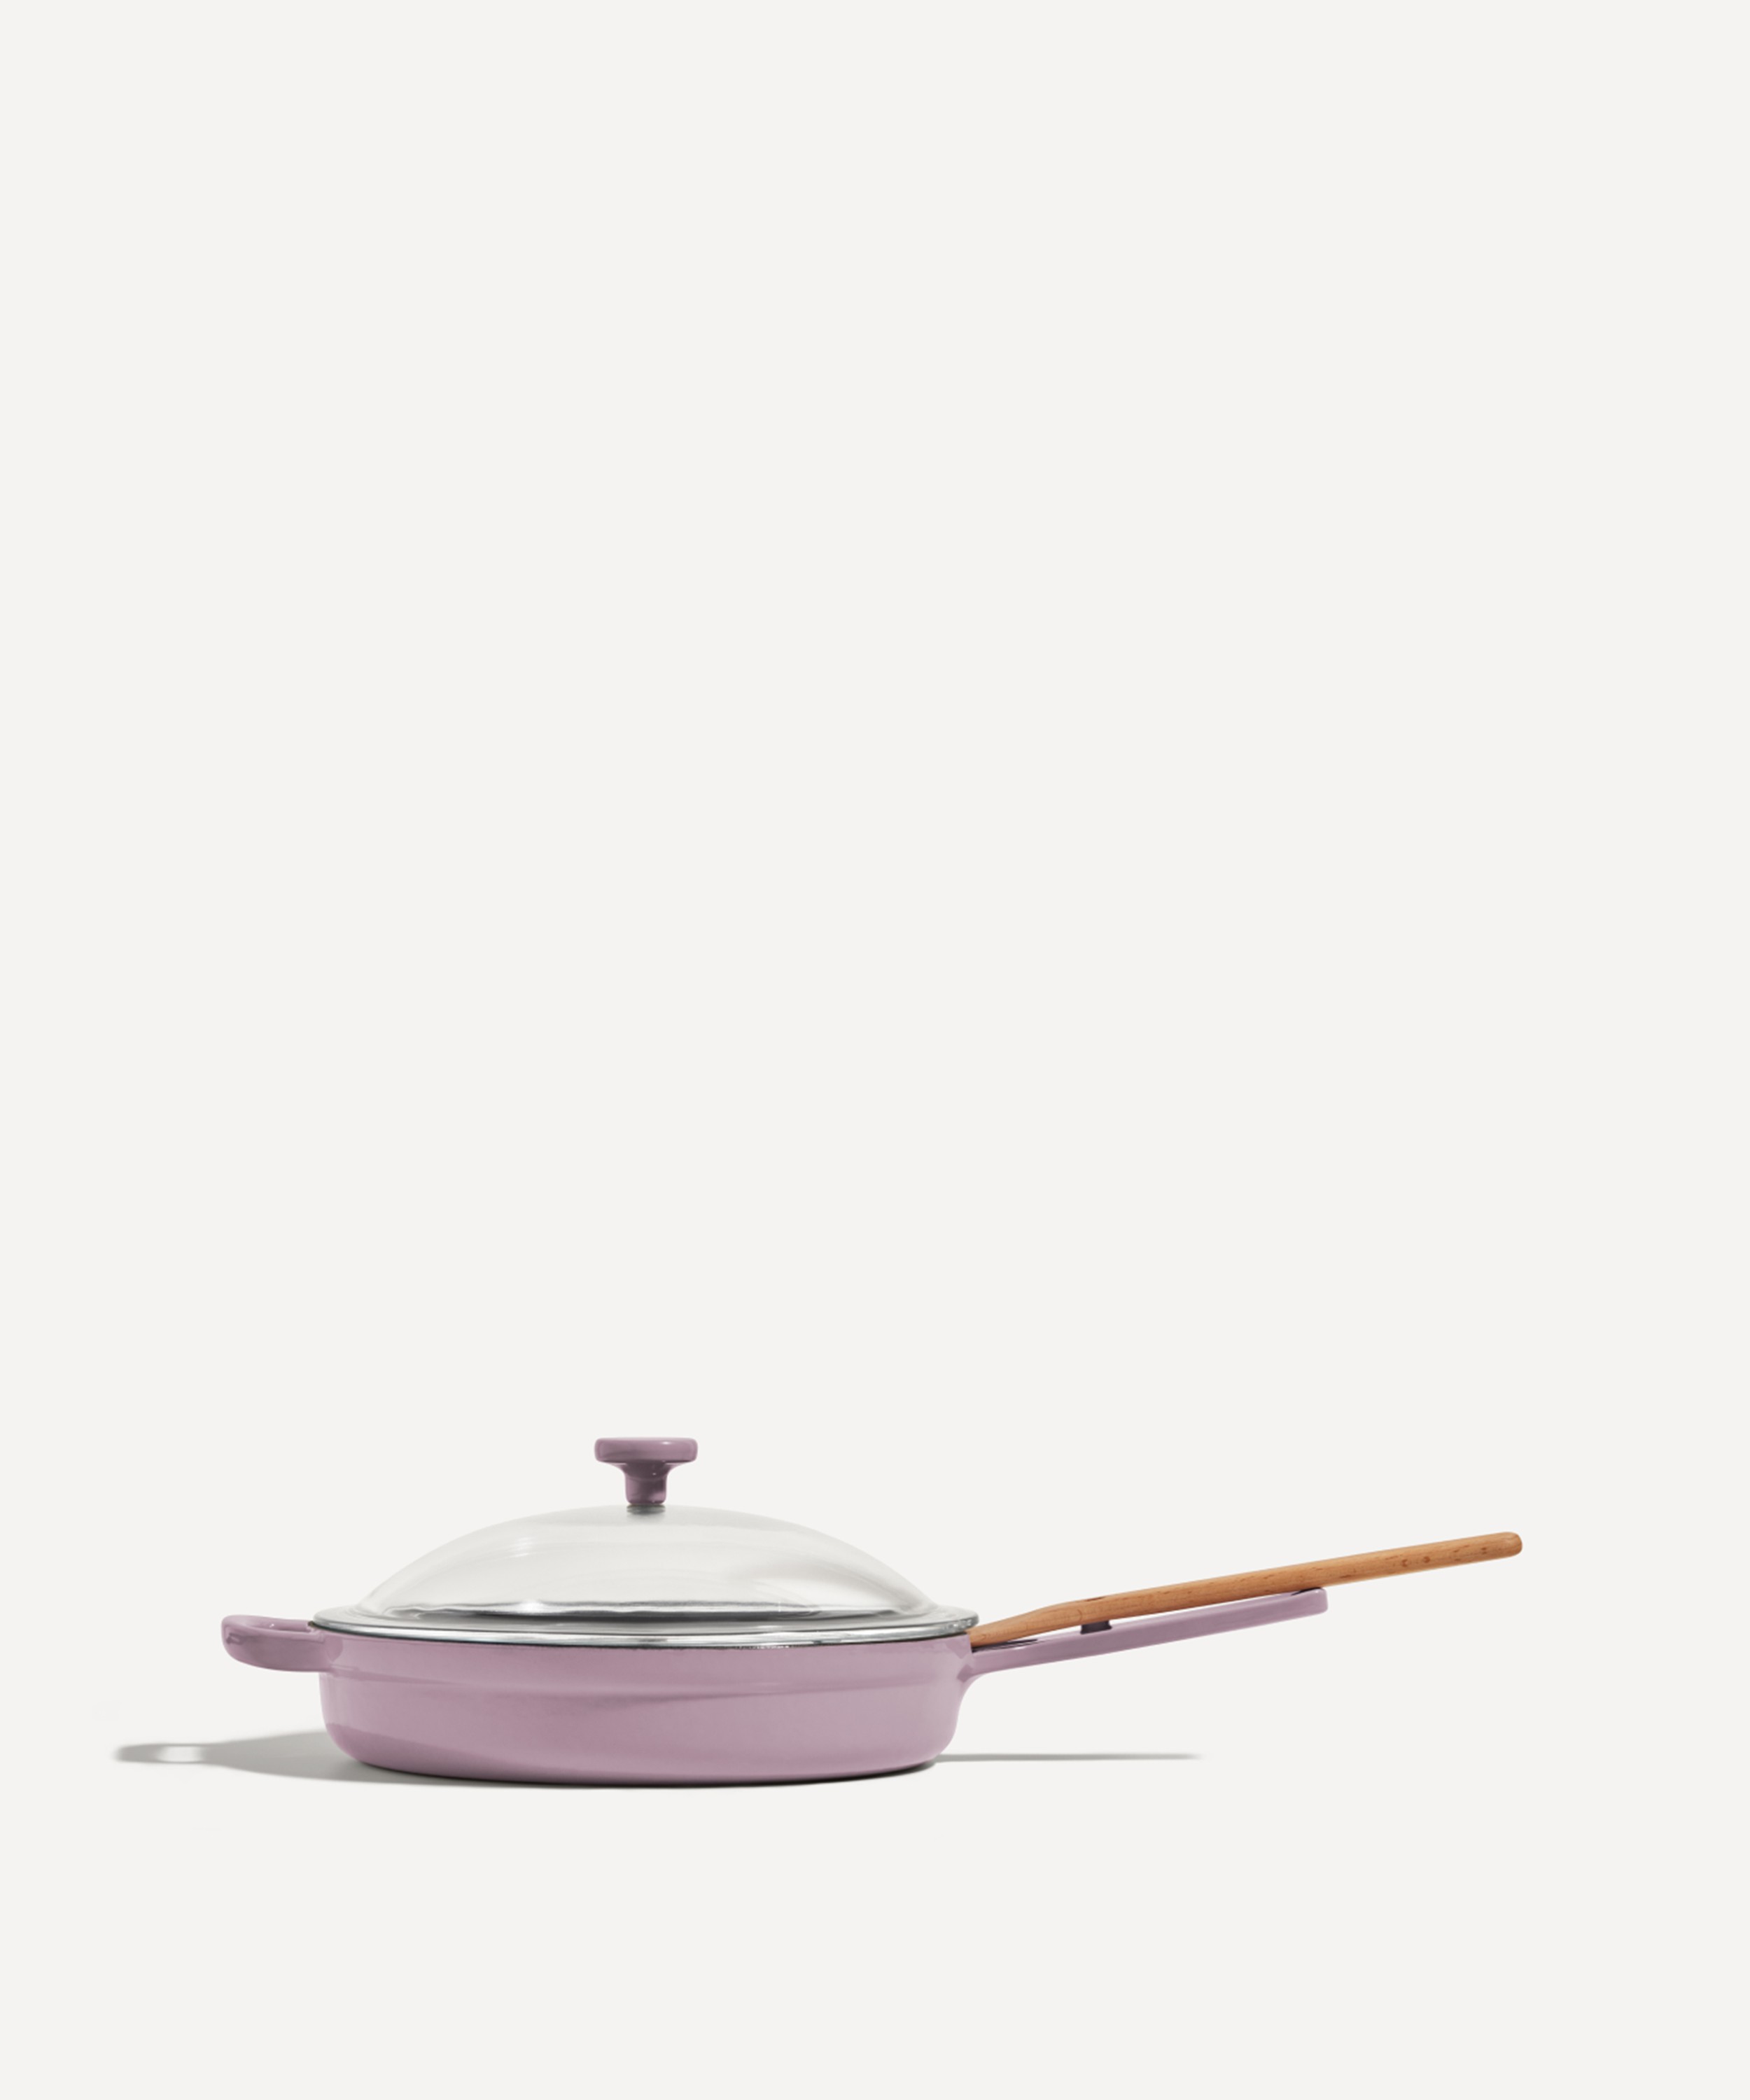 Our Place Tiny Cast Iron Always Pan in Lavender